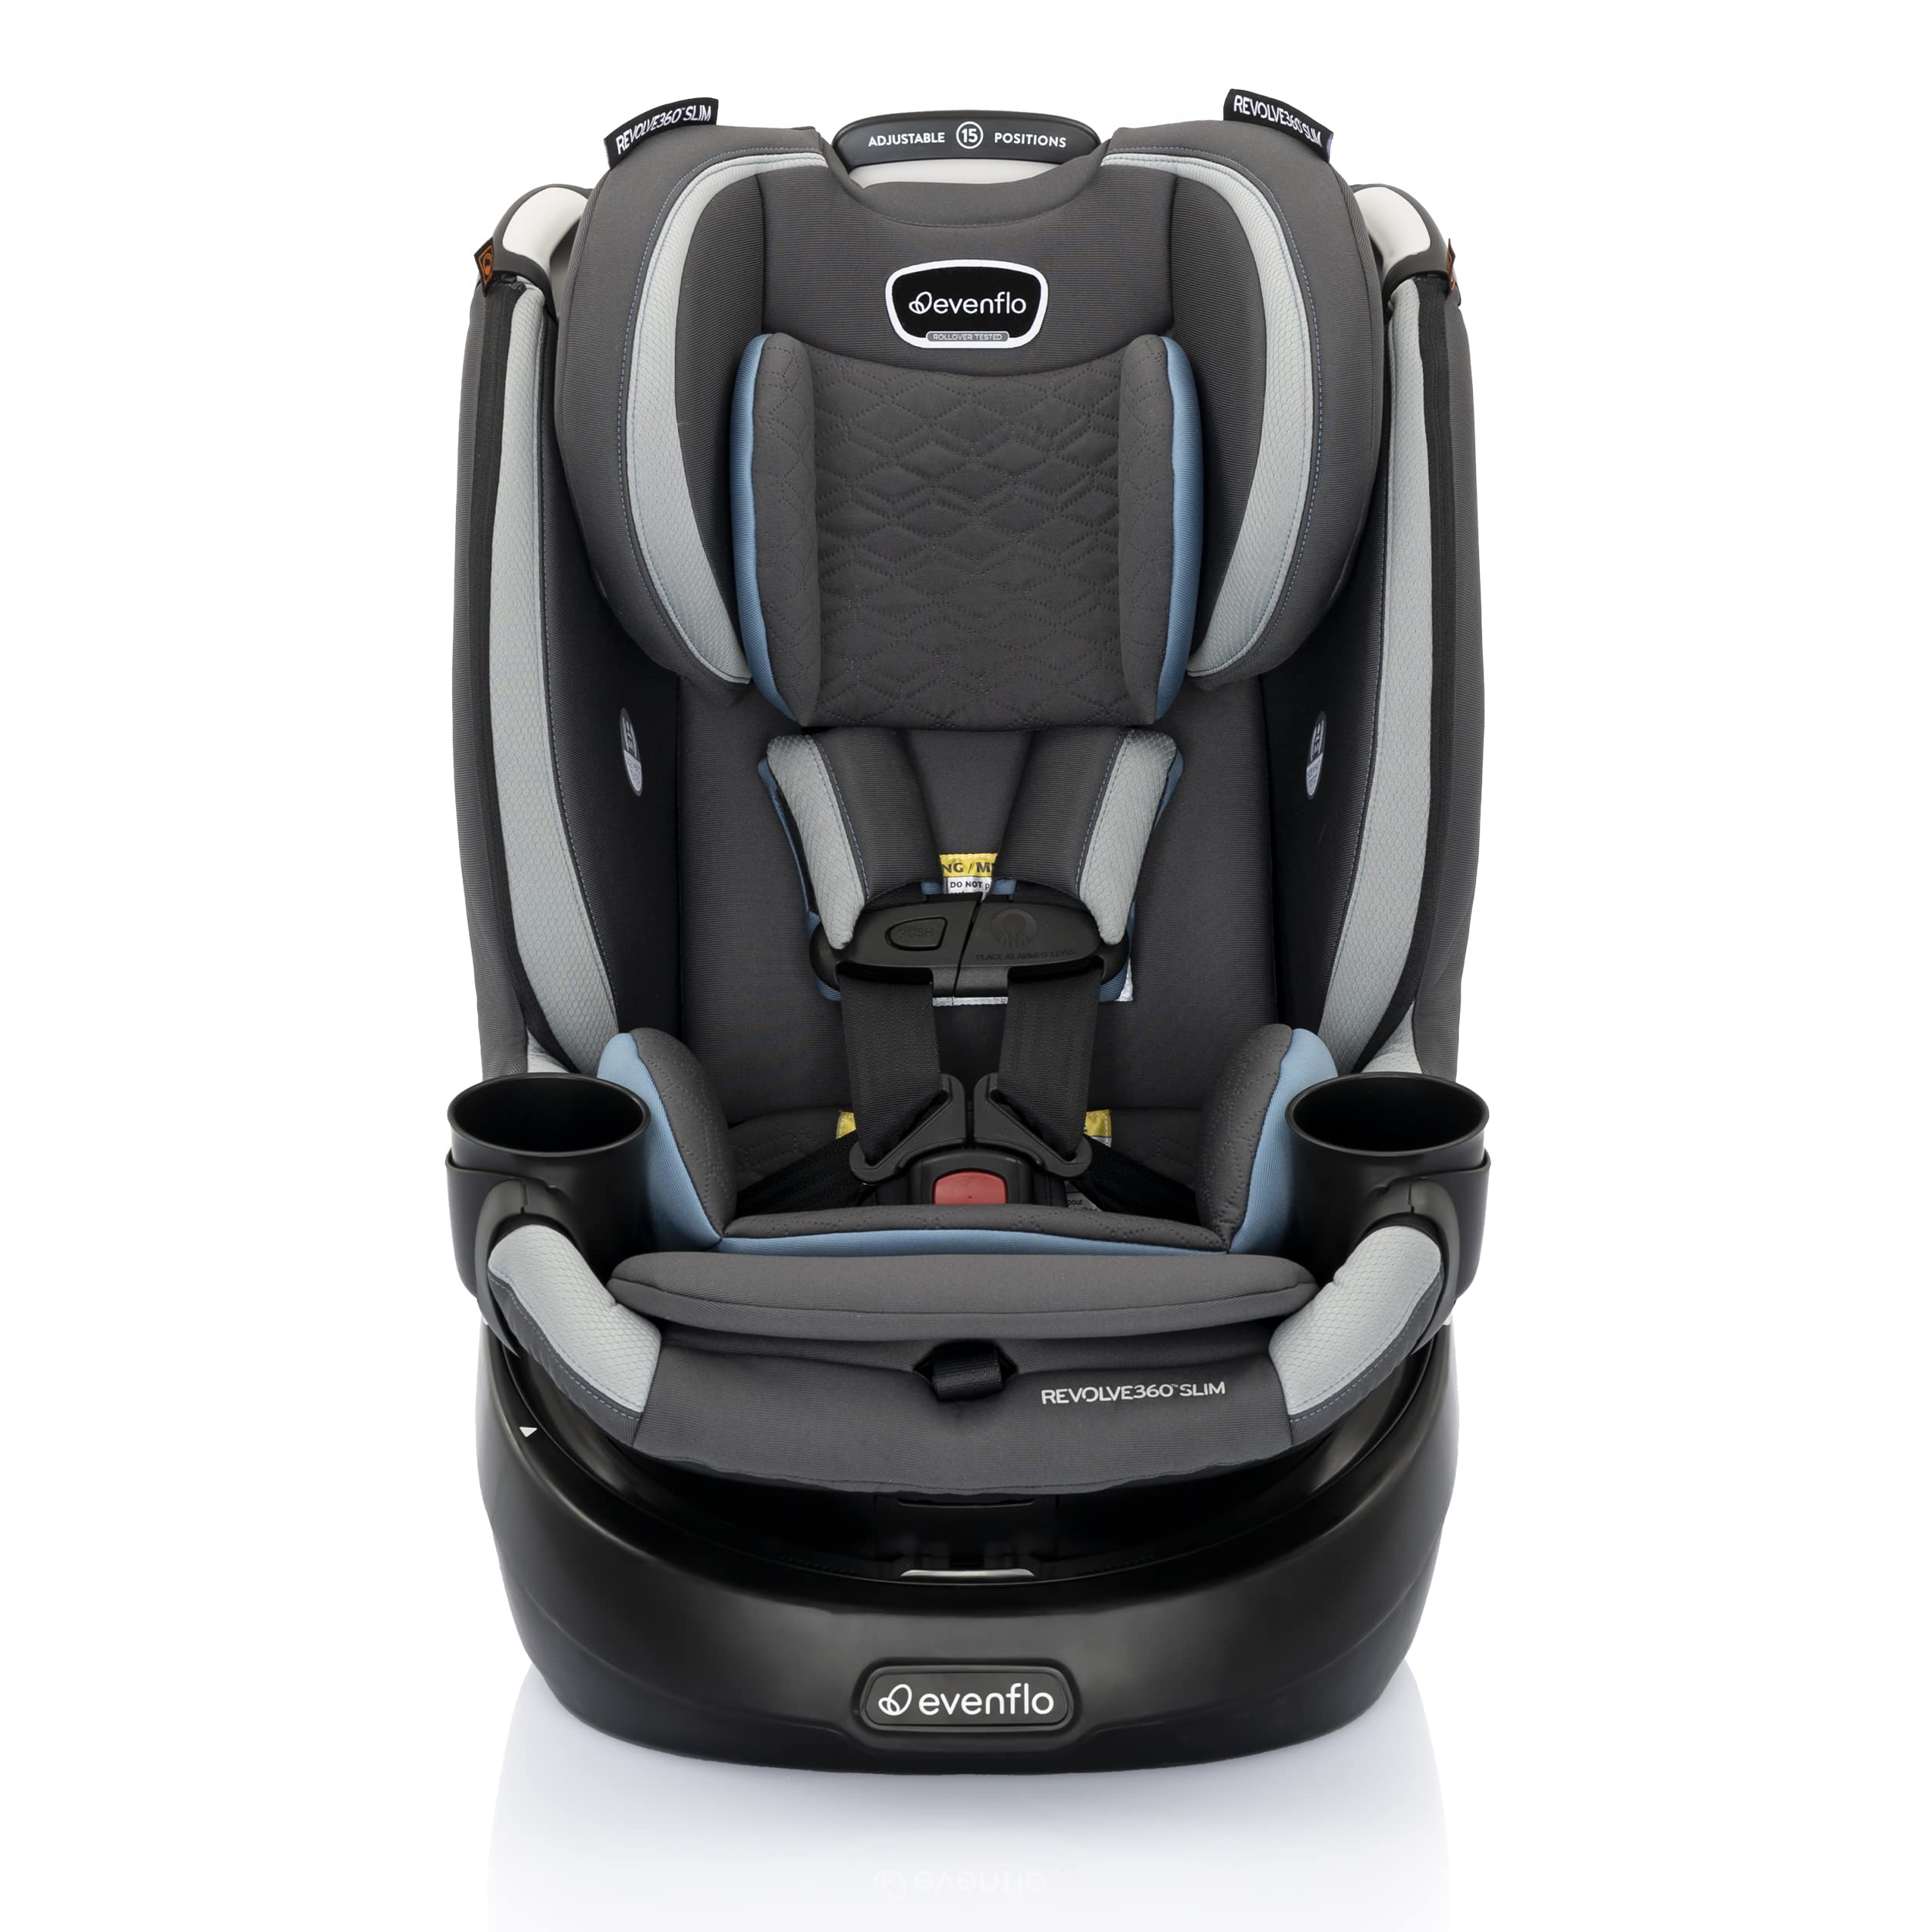 Evenflo Revolve360 Slim 2-in-1 Rotational Car Seat w/ Quick Clean Cover (Stow Blue) $249.21 + Free Shipping